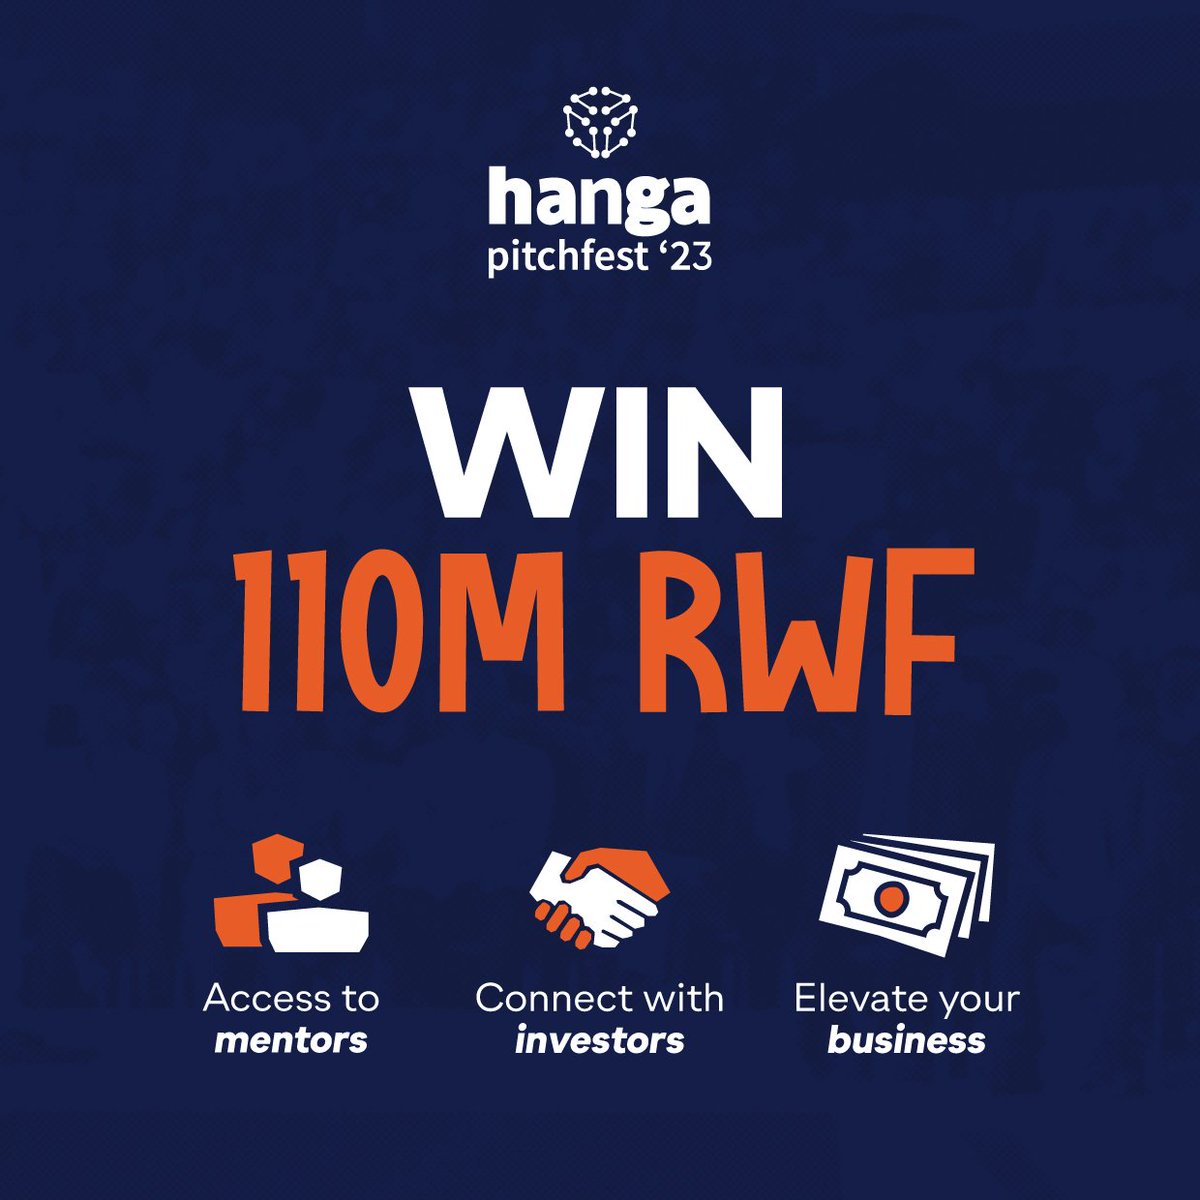 #HangaPitchfest2023 is the place to be for aspiring entrepreneurs. Spread the word and tell a friend to tell a friend! 🗣️5 prizes worth 110 million Rwf; this could be the breakthrough your pals' startups need. Deadline: Sept 10th. Details: hangapitchfest.rw